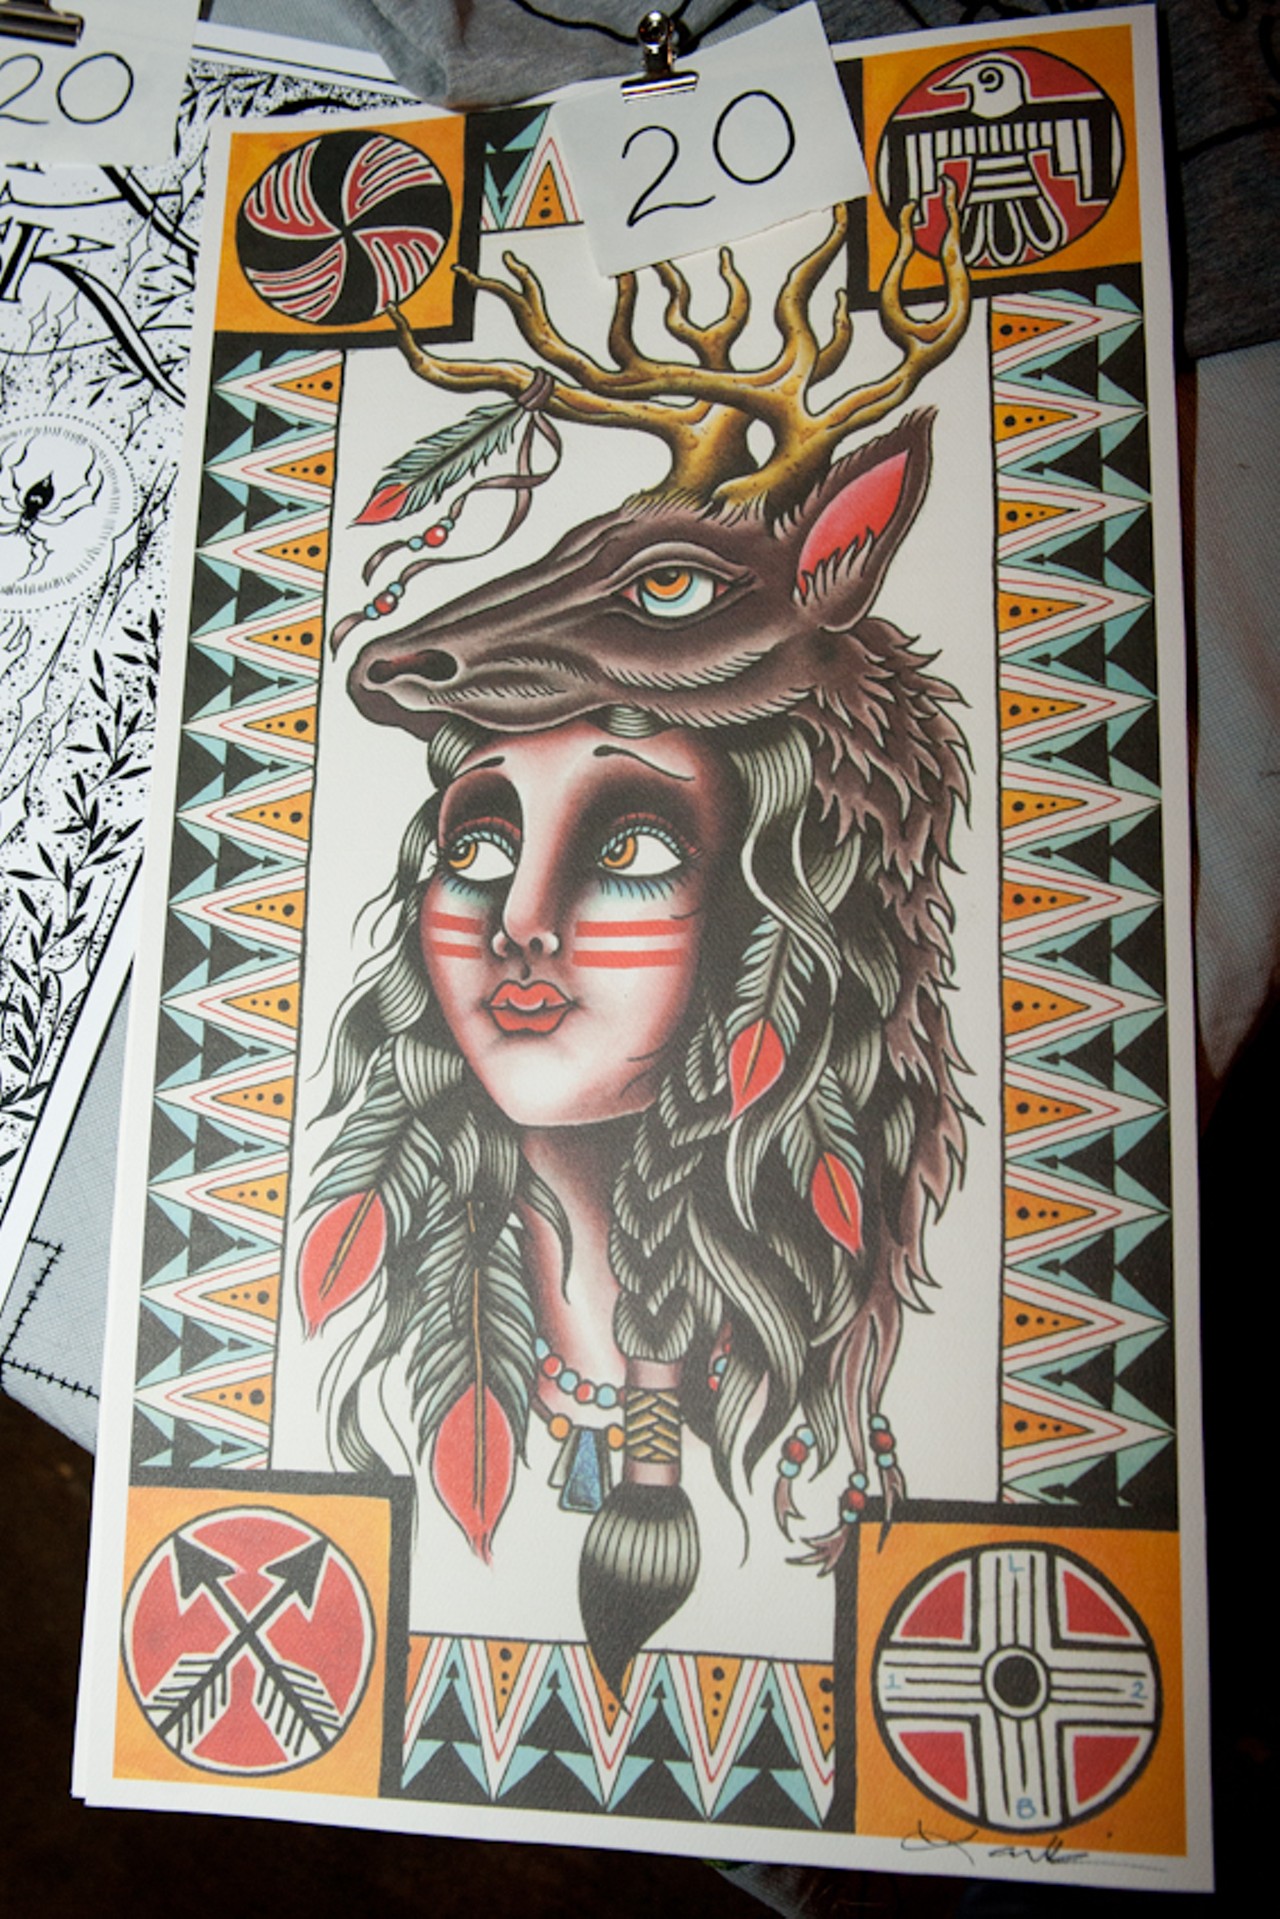 Prints available for sale at the Tower Classic Tattooing table.